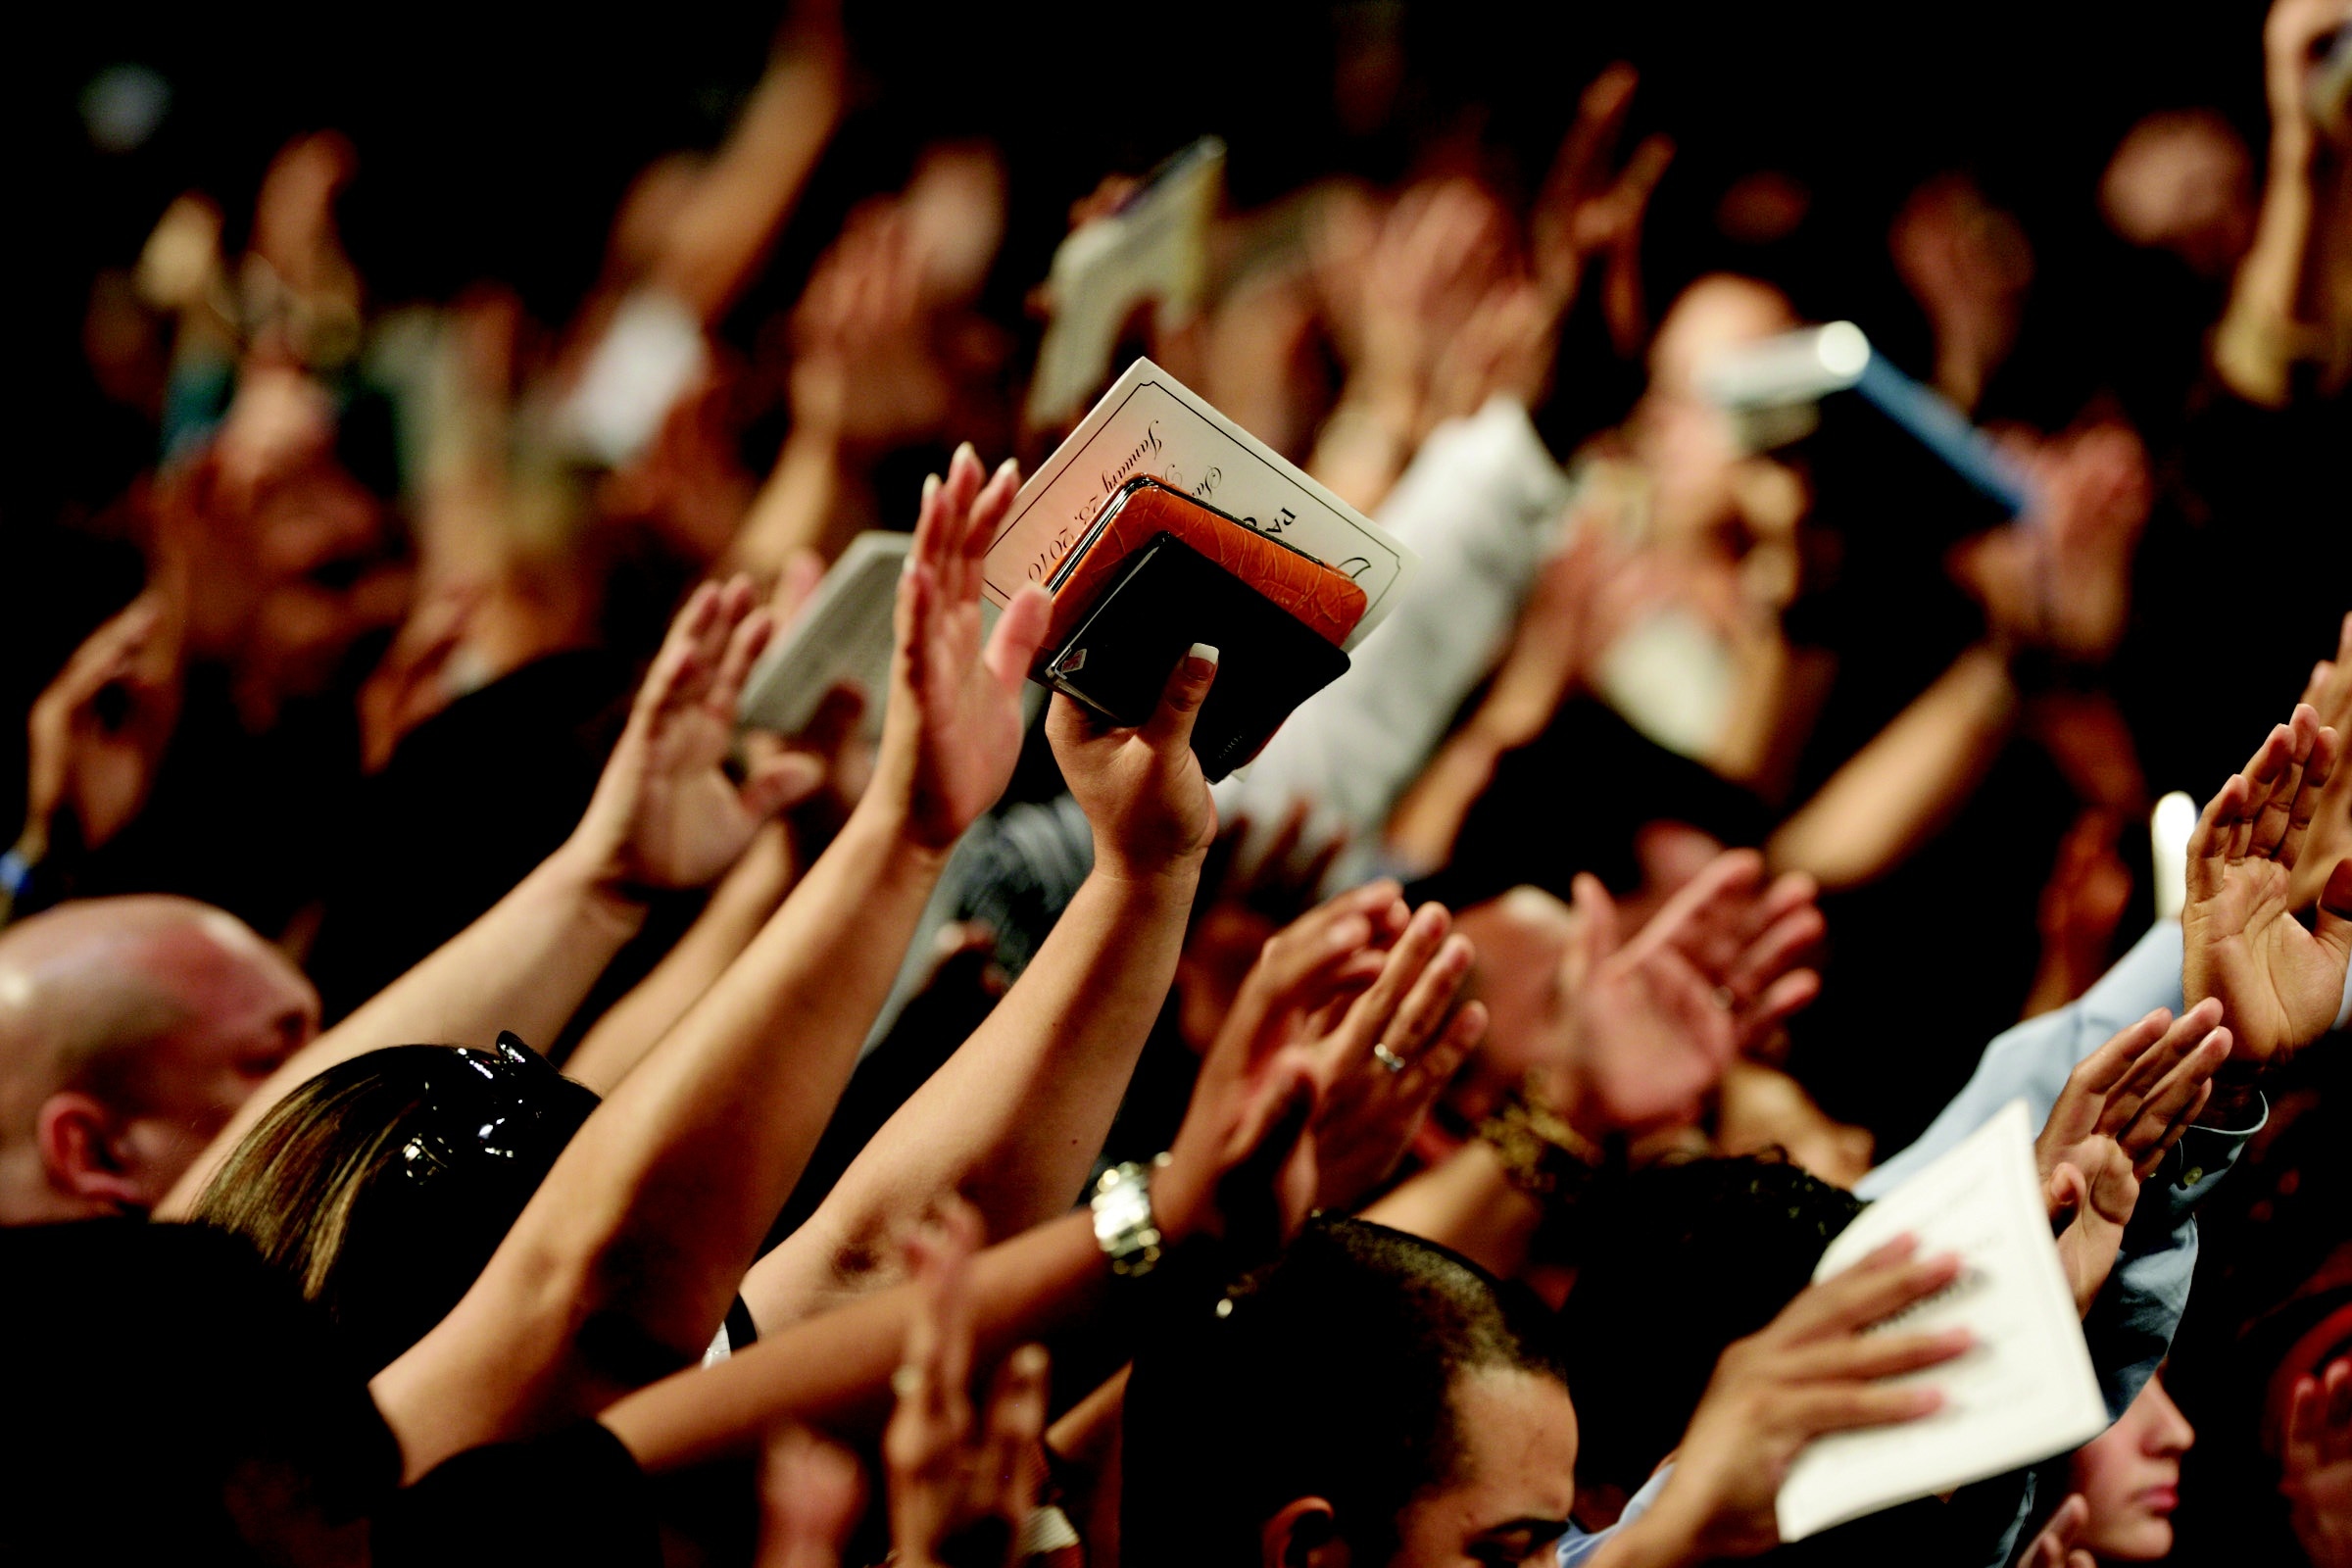 Bible, Worship, Christian, Religious, crowd, large group of people